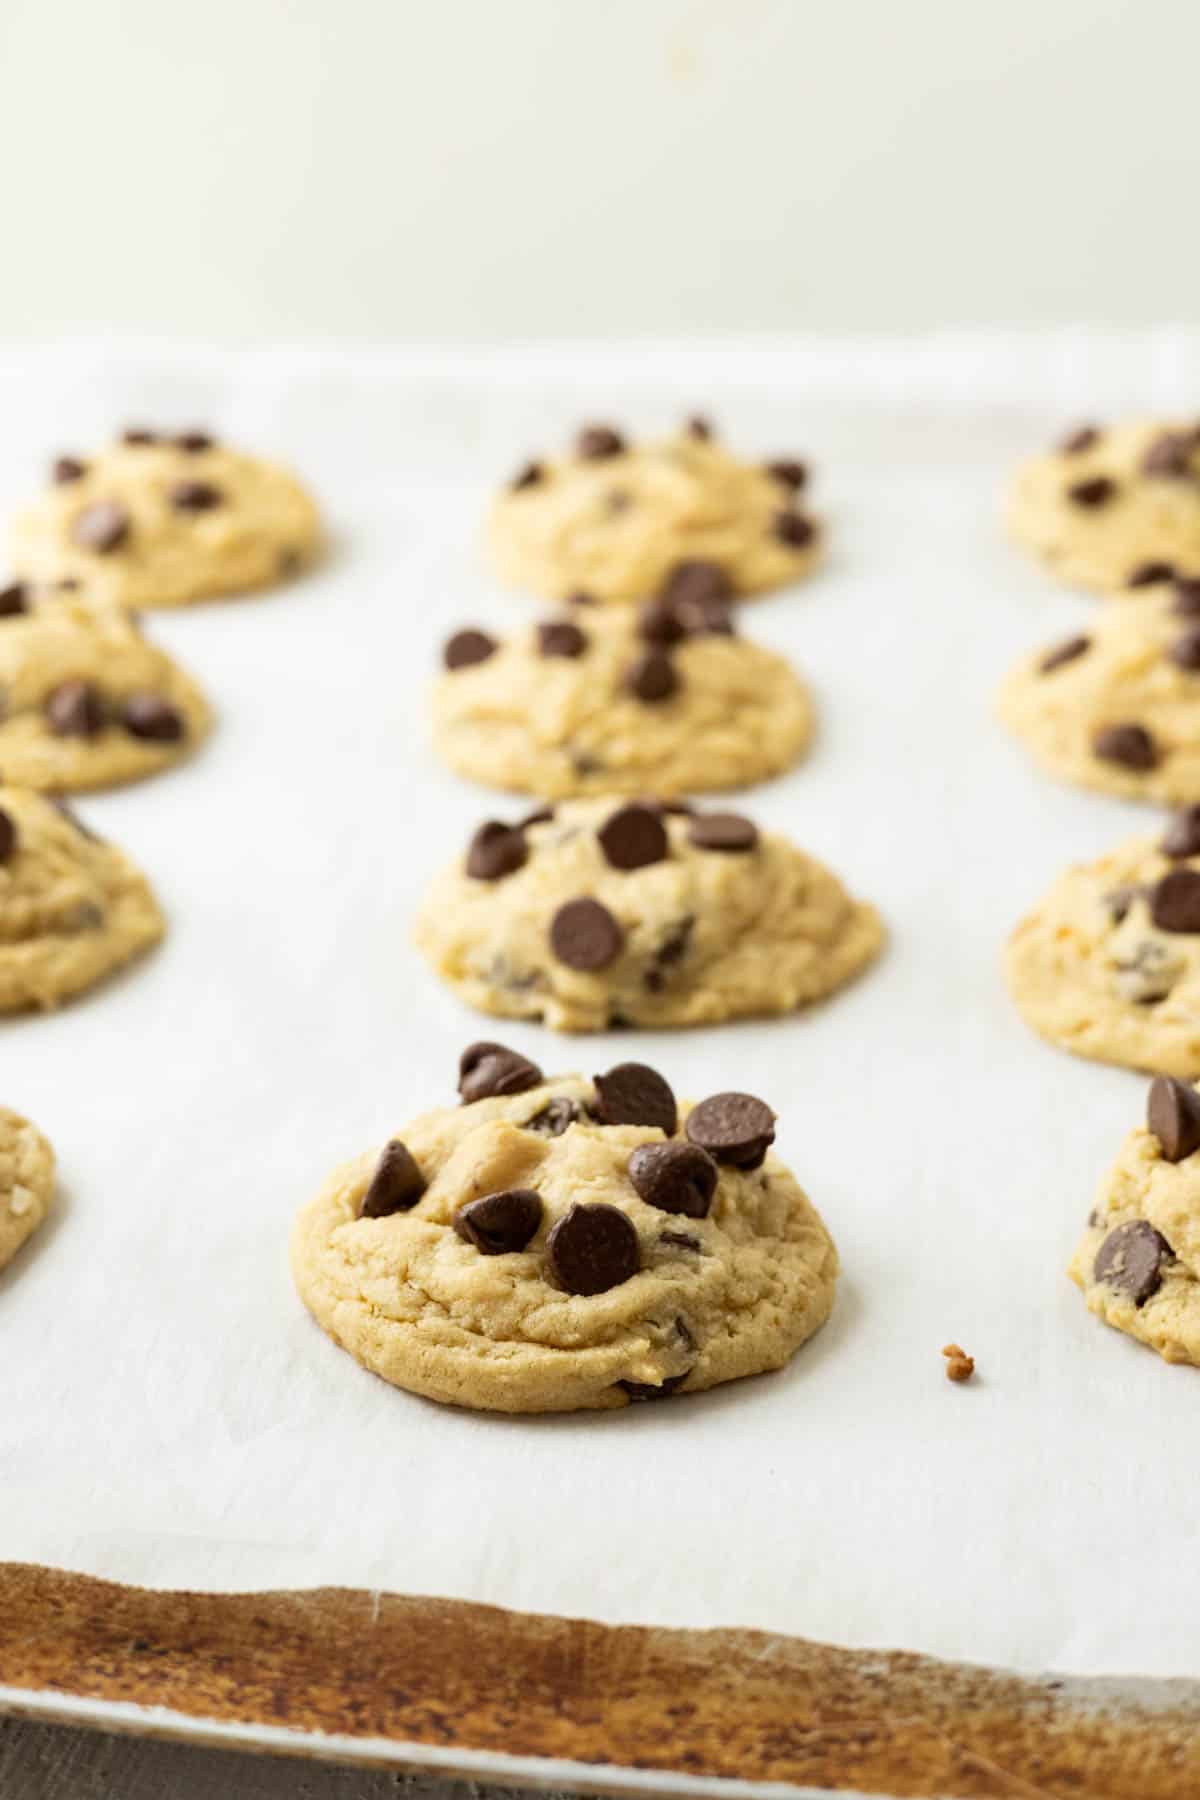 Coconut chocolate chip cookies on a baking sheet.